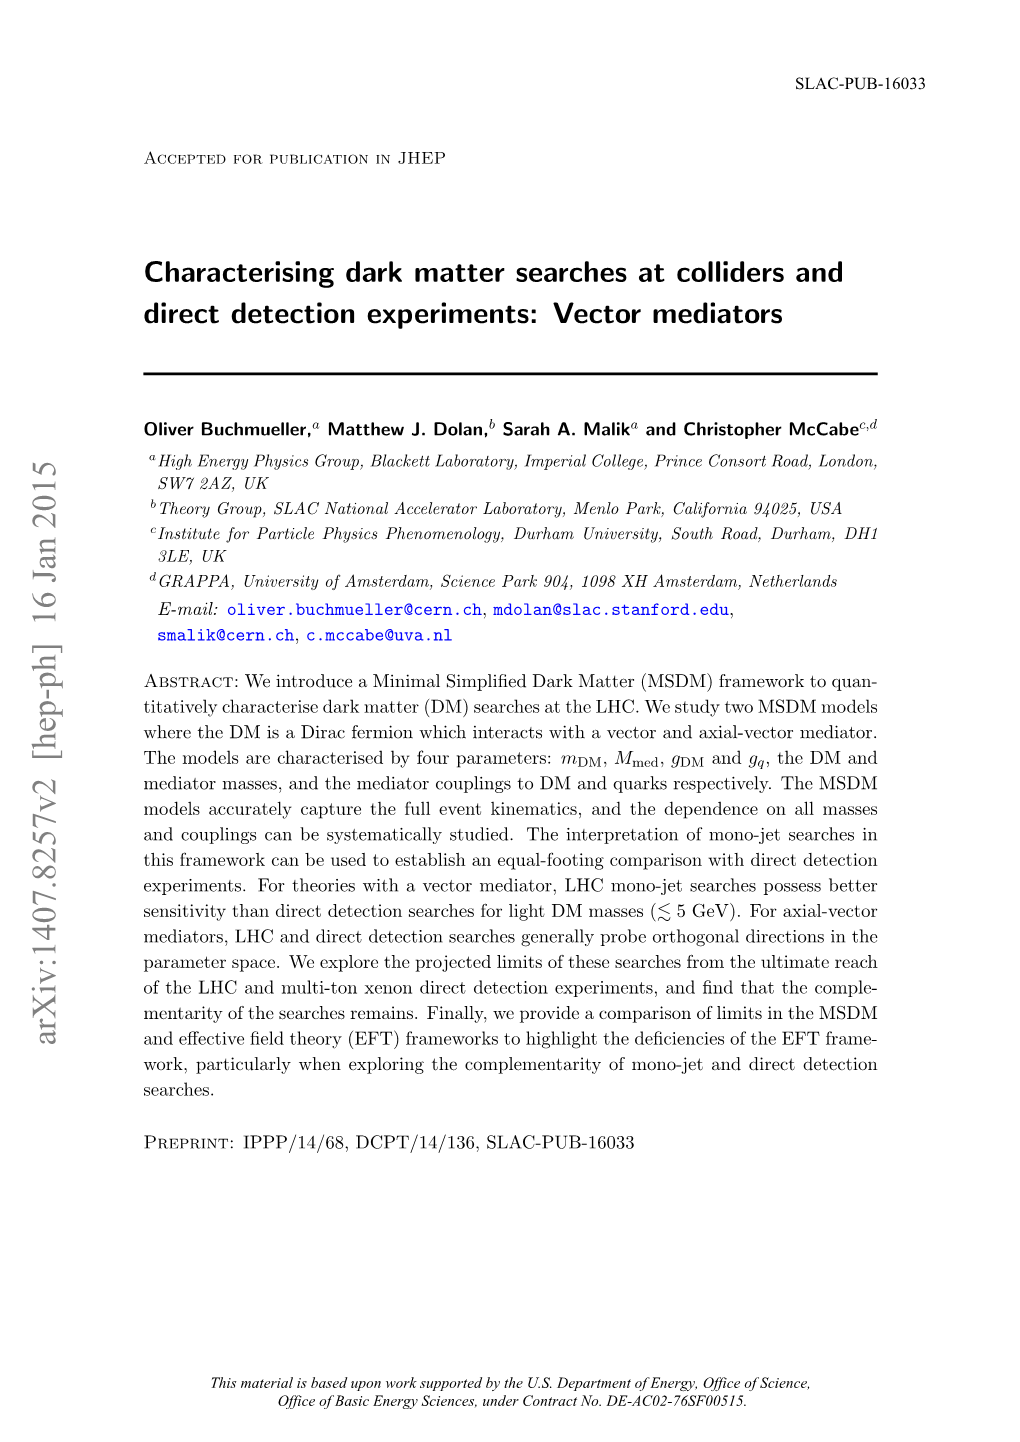 Characterising Dark Matter Searches at Colliders and Direct Detection Experiments: Vector Mediators